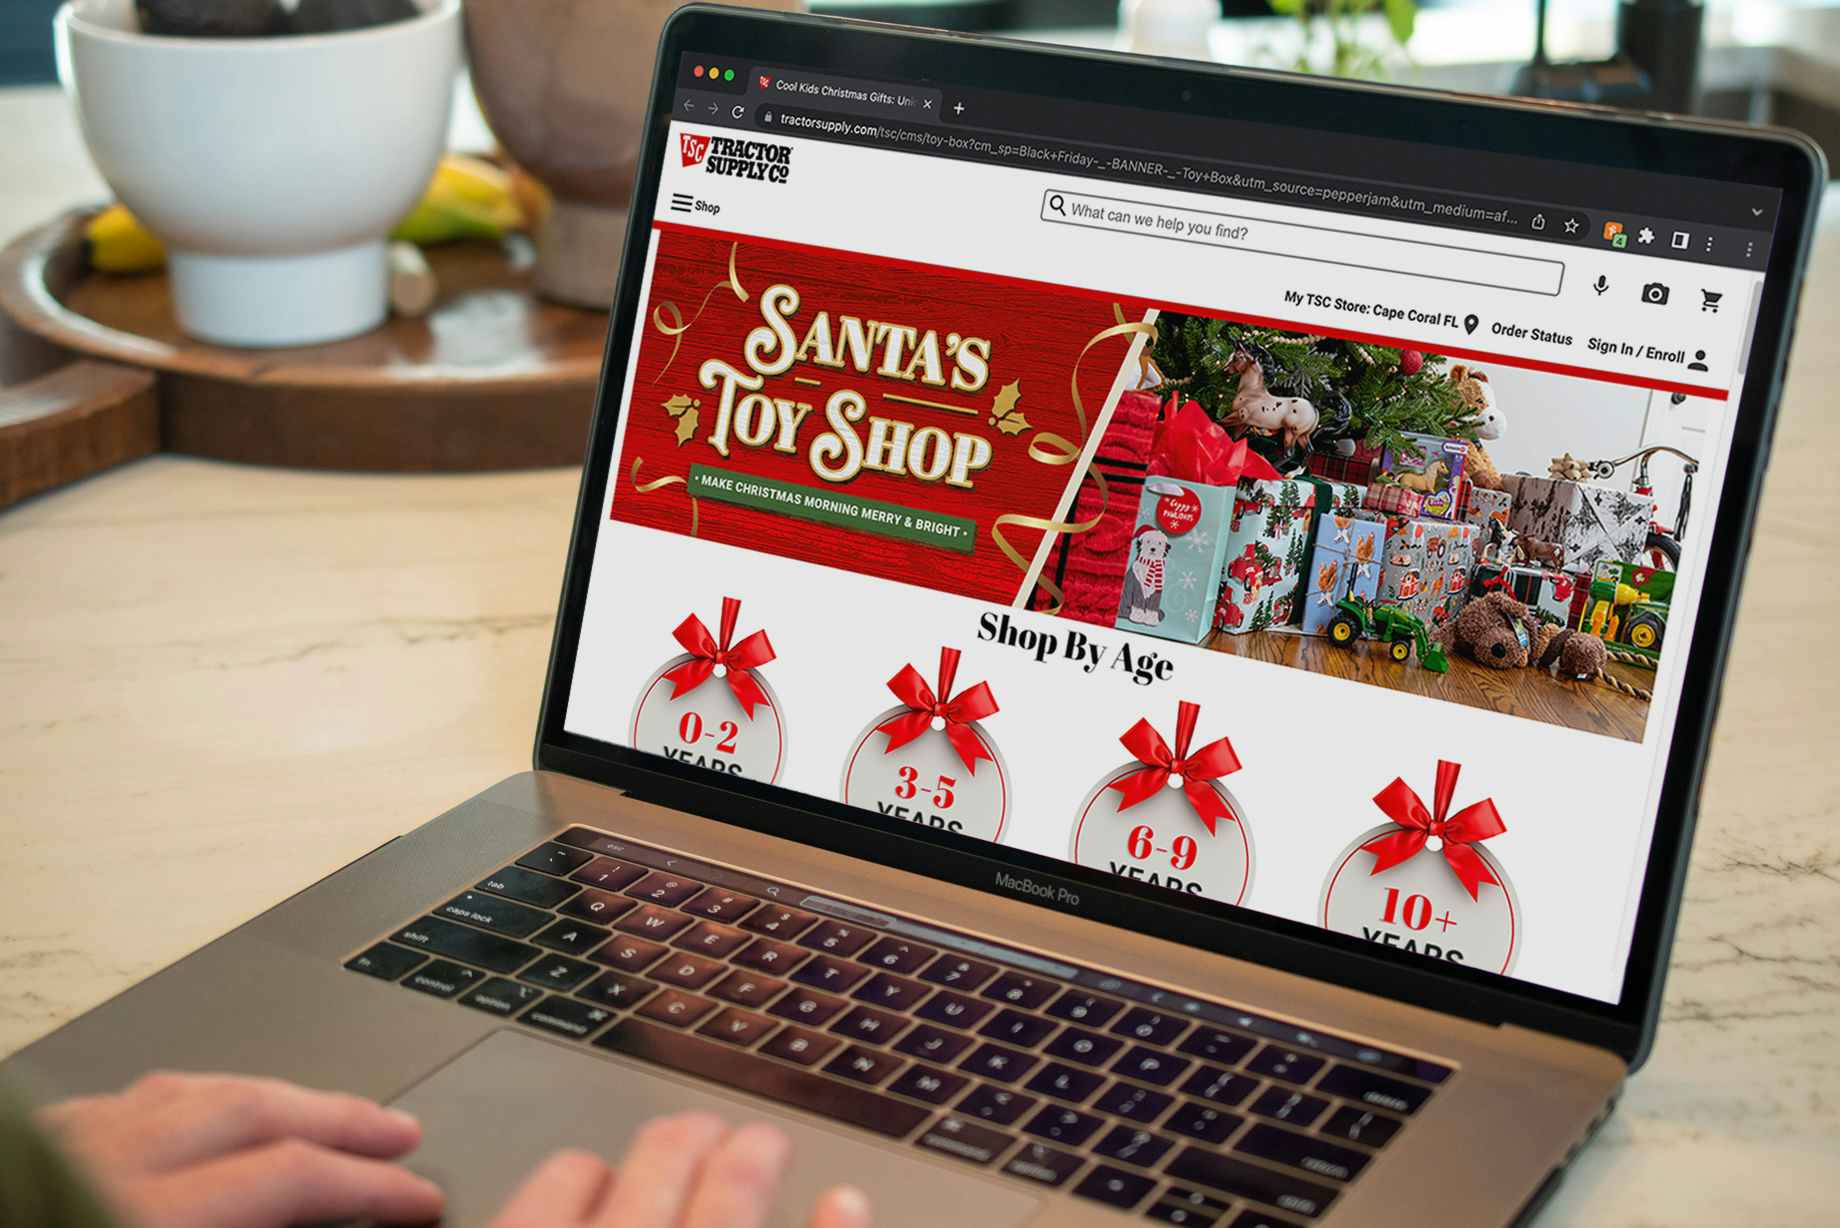 A person using a laptop displaying the Santa's Toy Shop page of the Tractor Supply Company website.